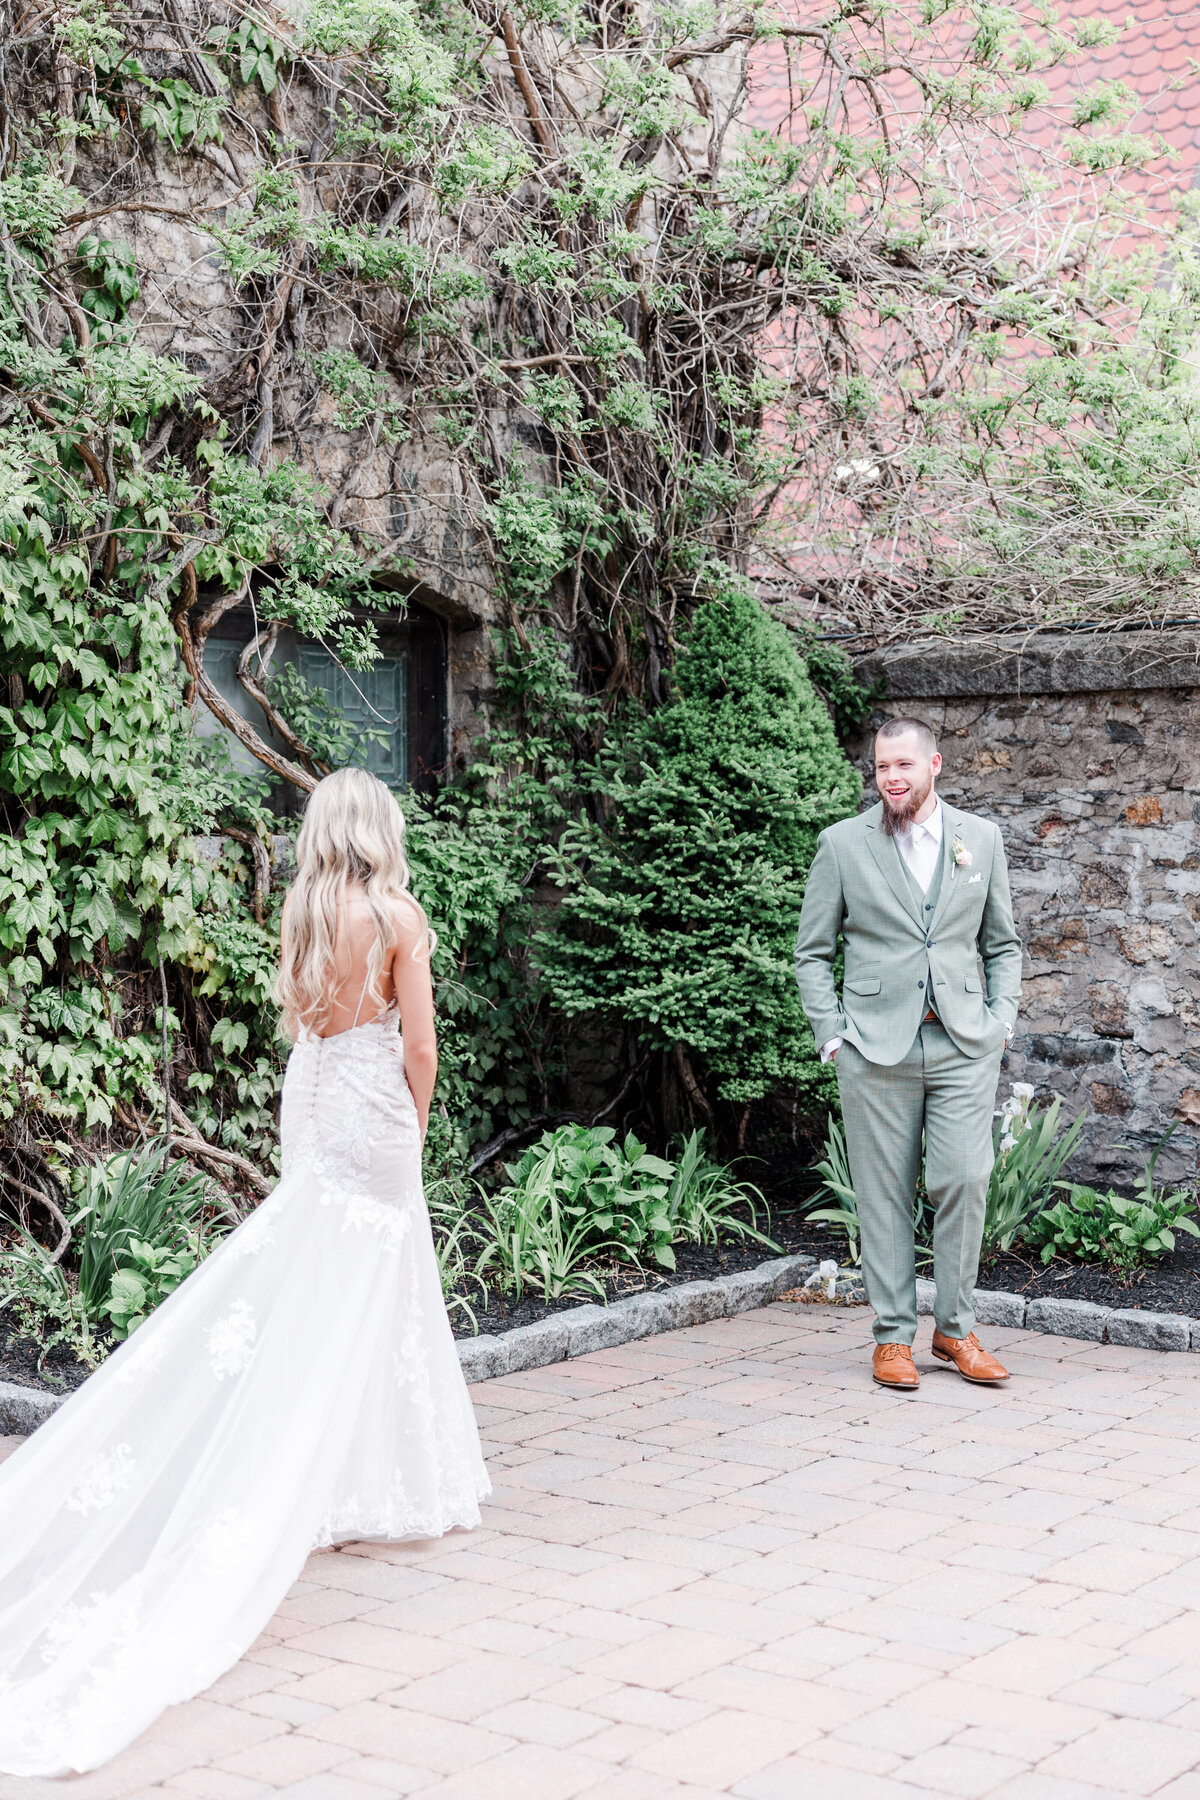 wedding-photography-at-saint-clements-castle-in-portland-connecticut-37